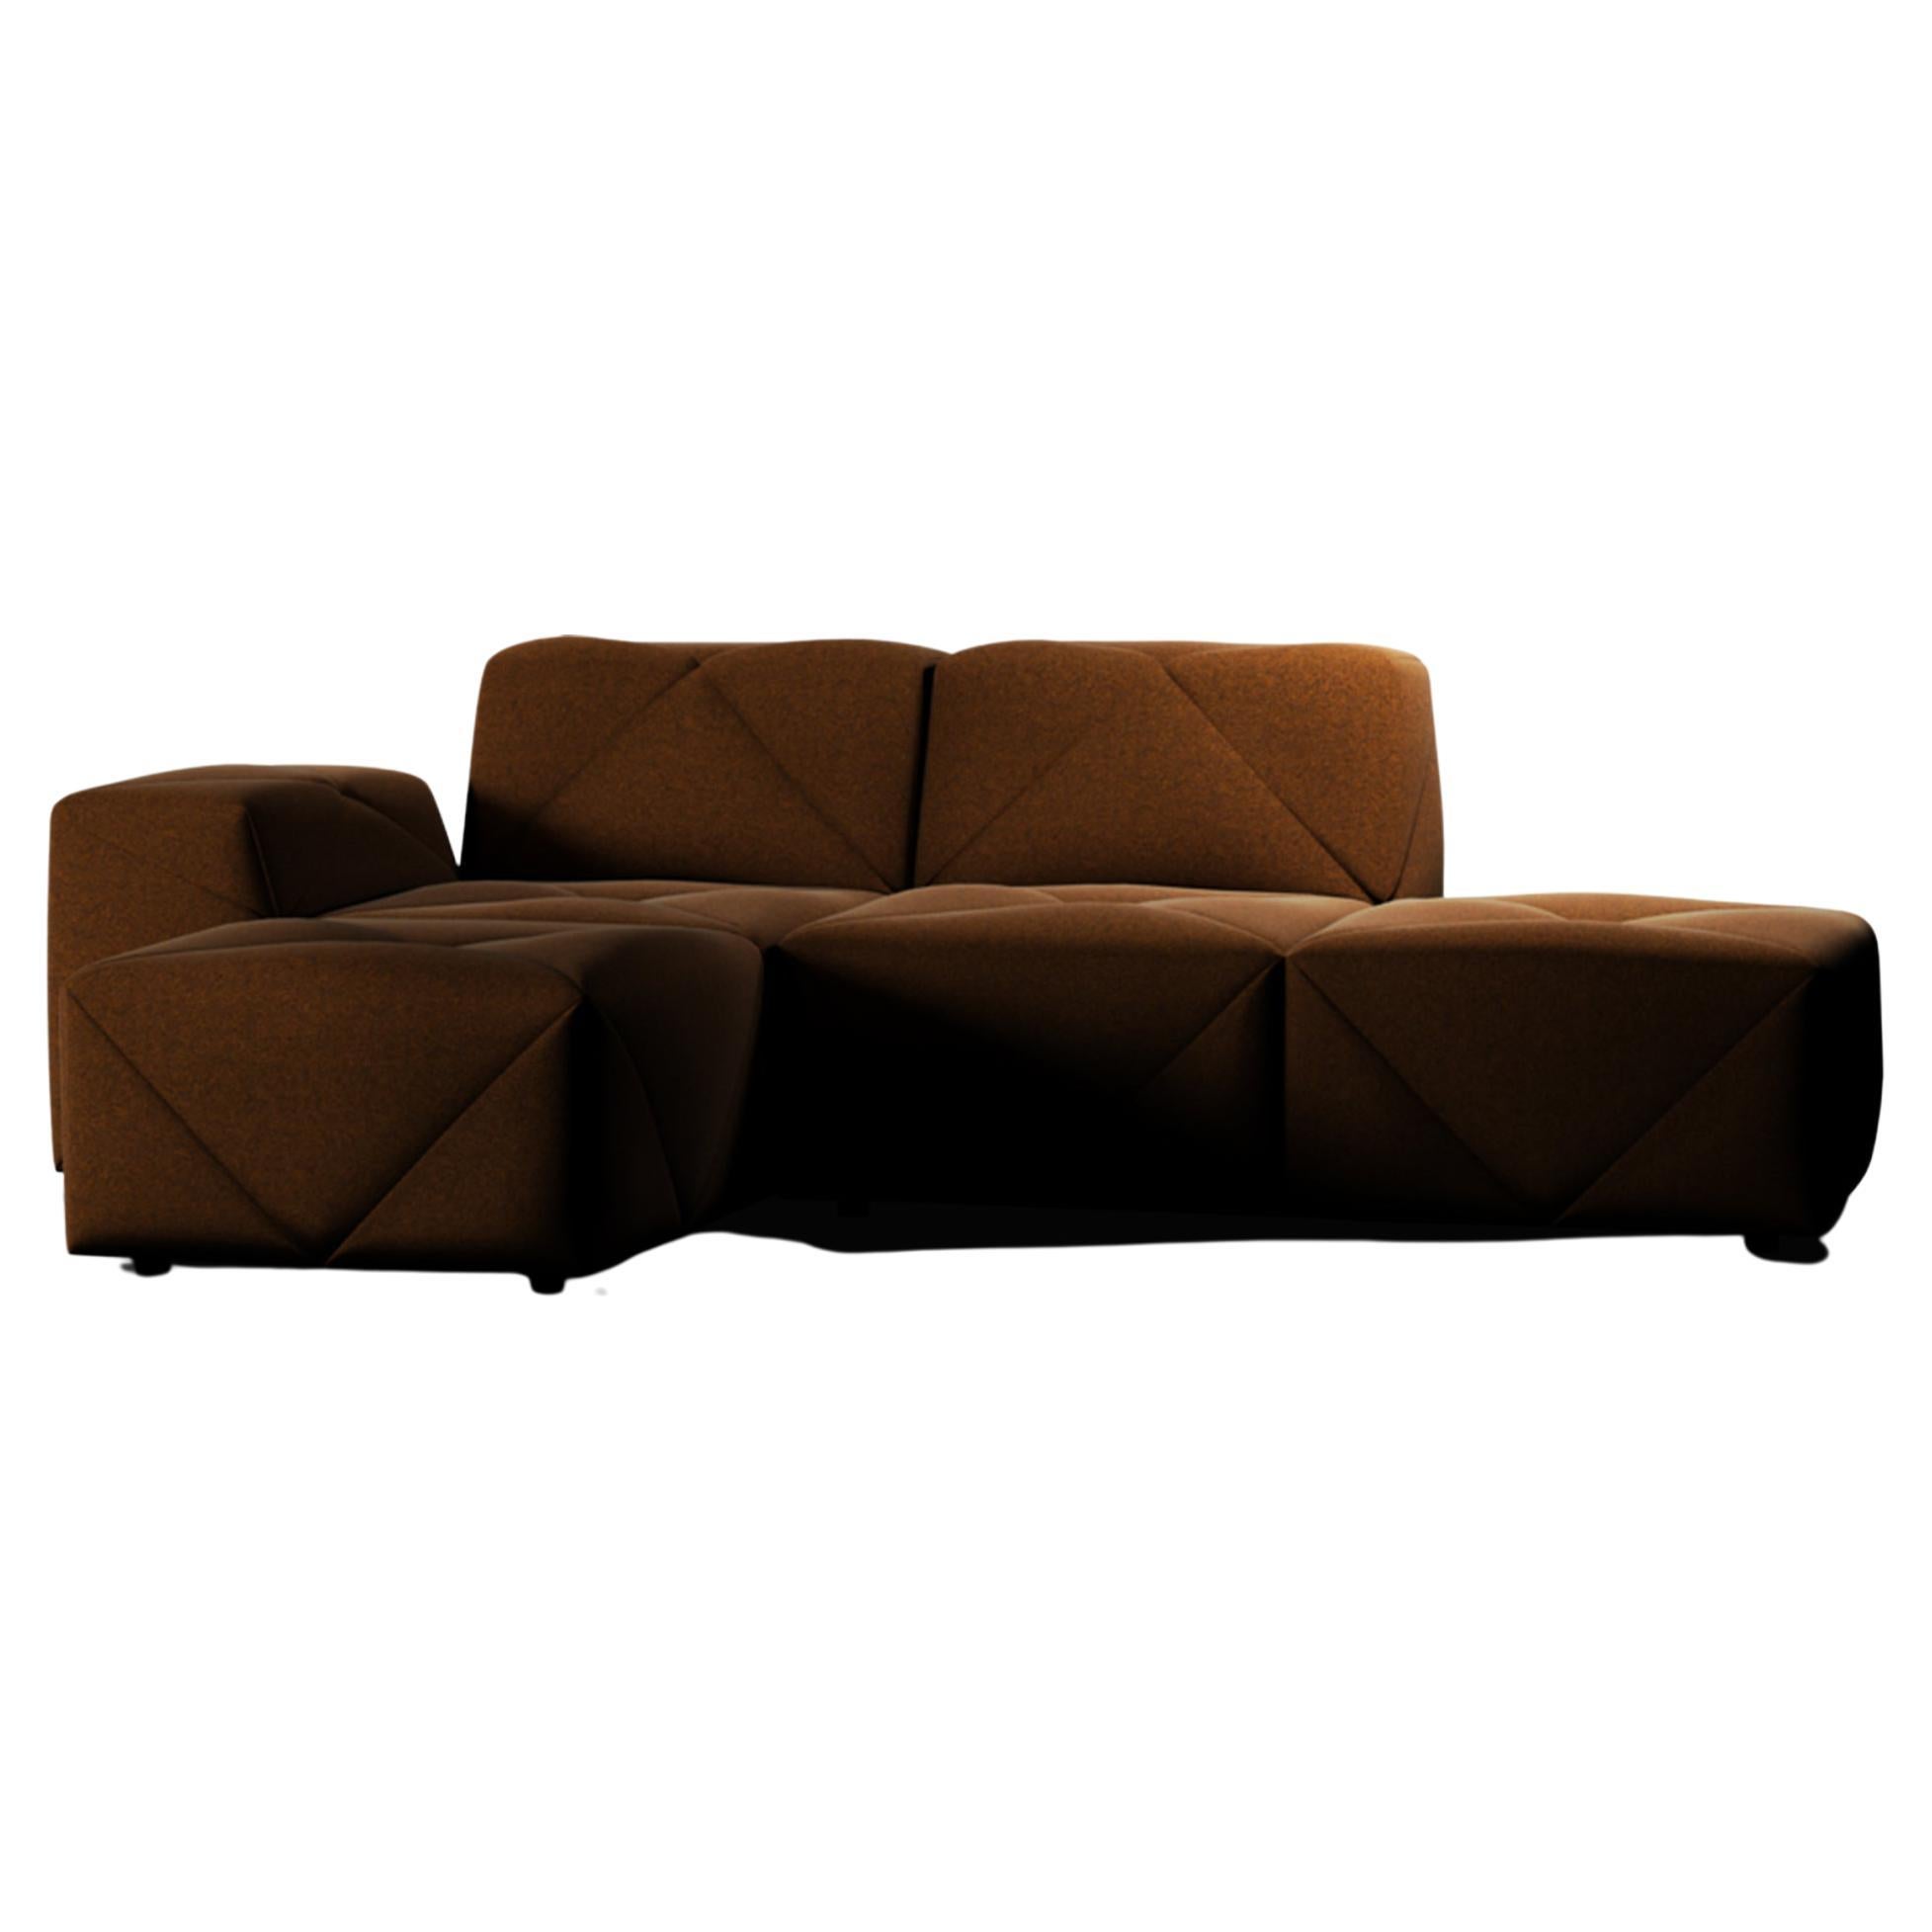 Moooi BFF Left Arm Chaise Longue Sofa in Divina Melange 3, 571 Copper Upholstery For Sale